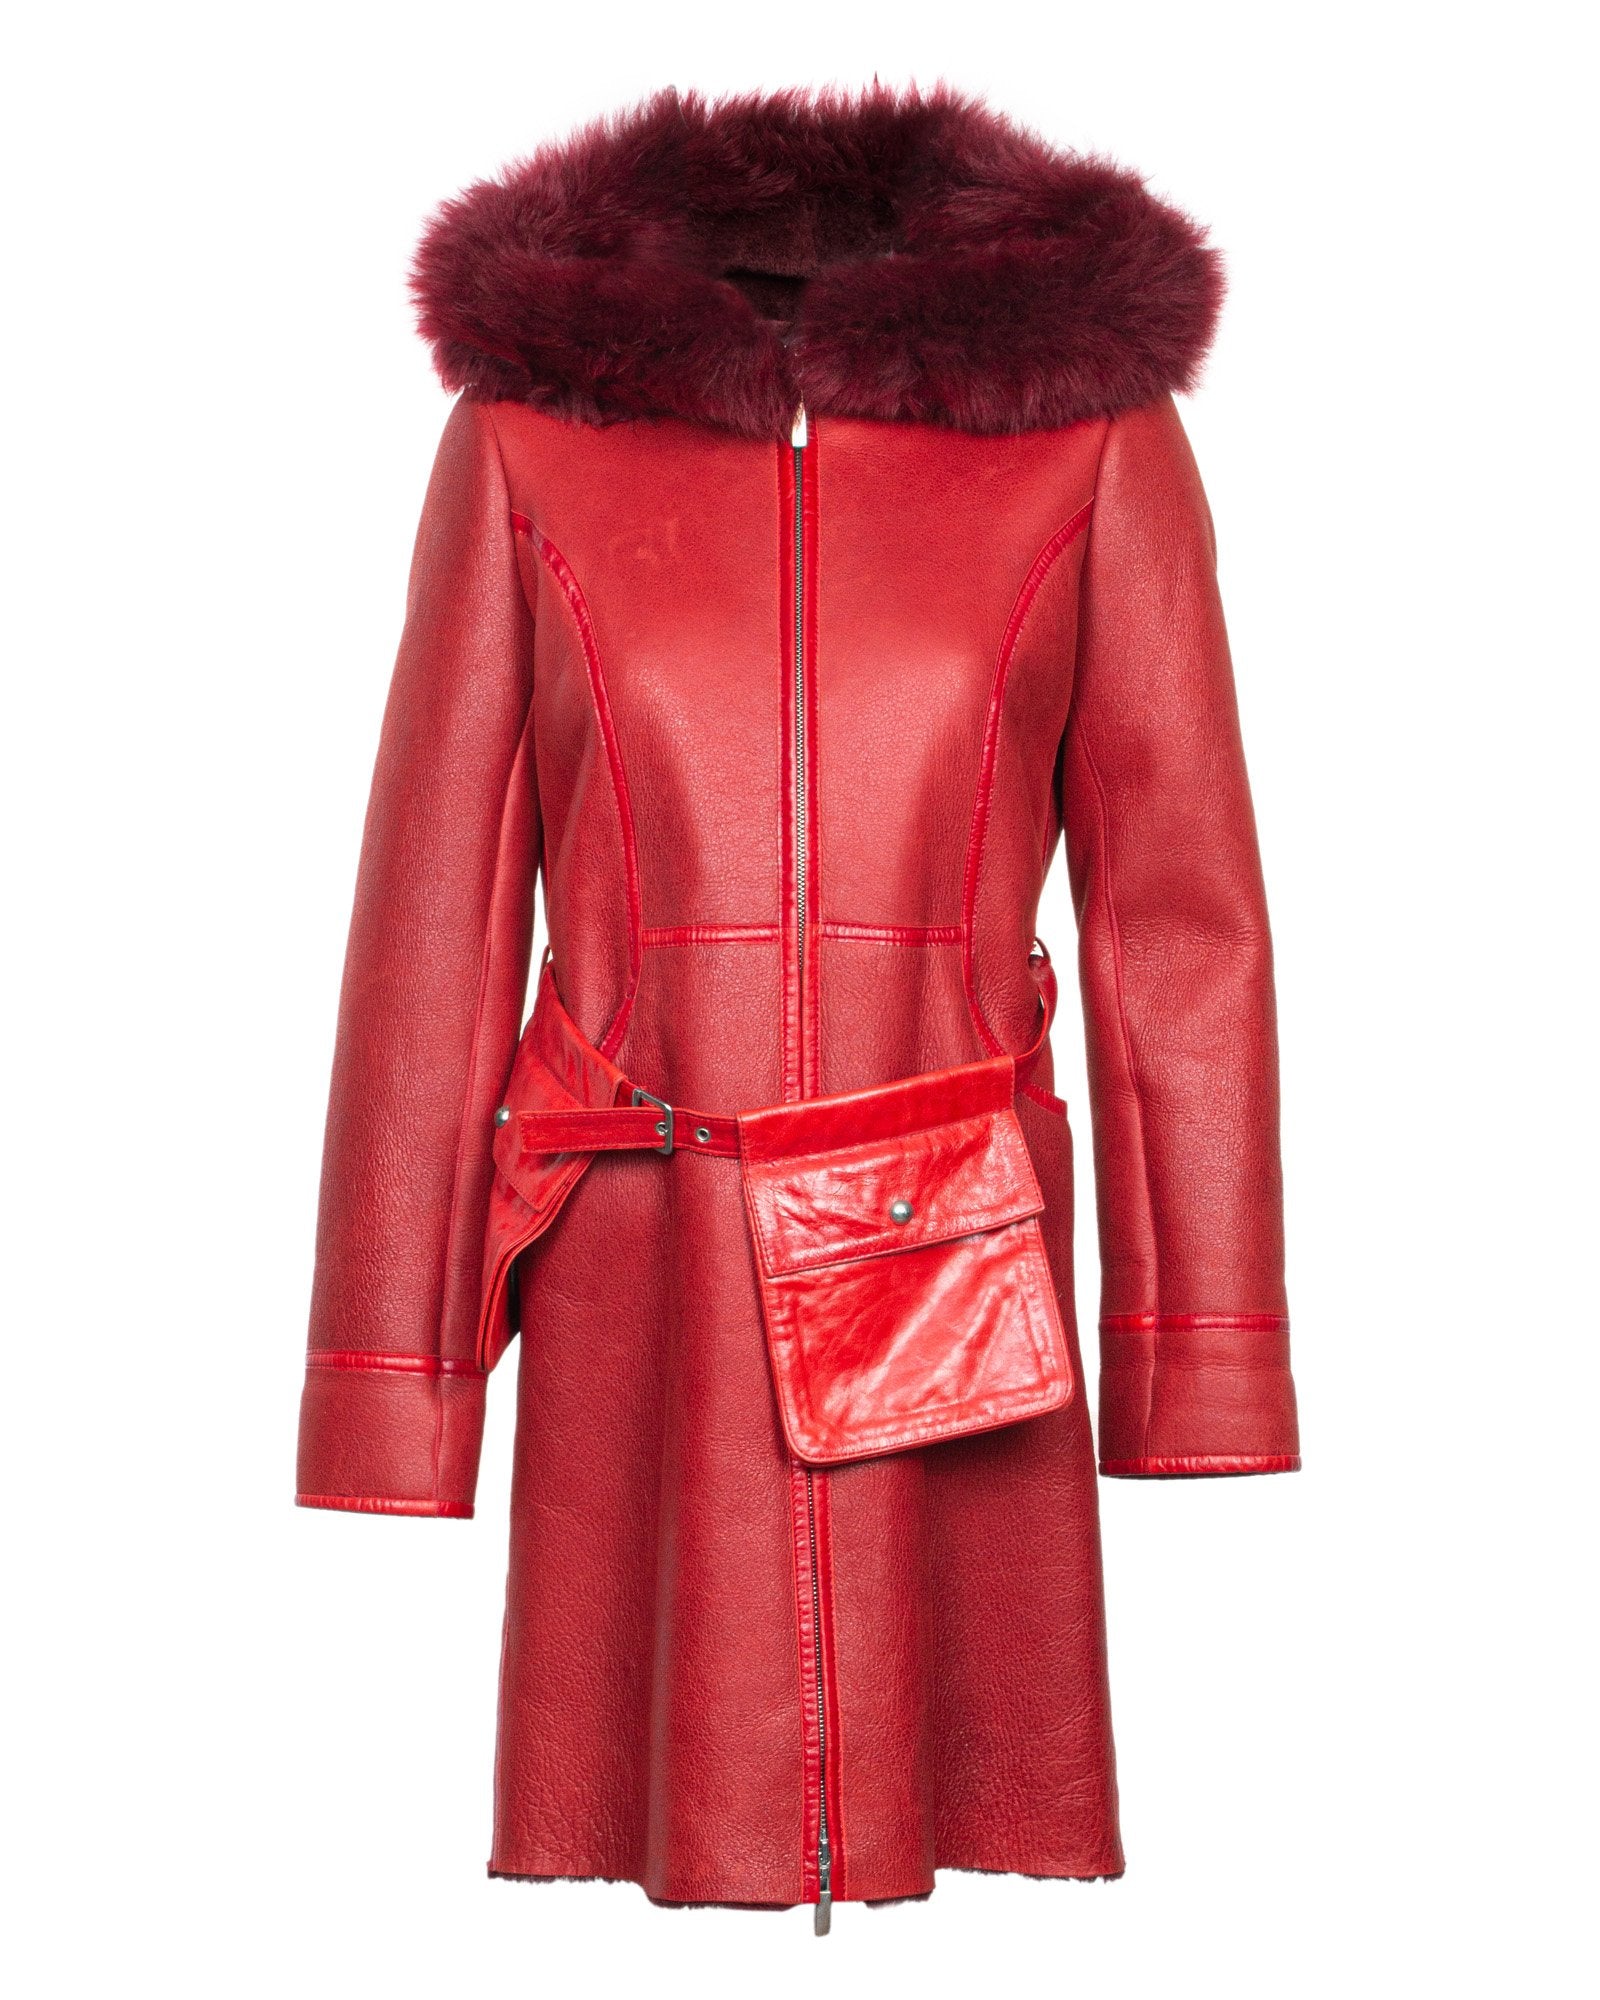 Red Leather Coat